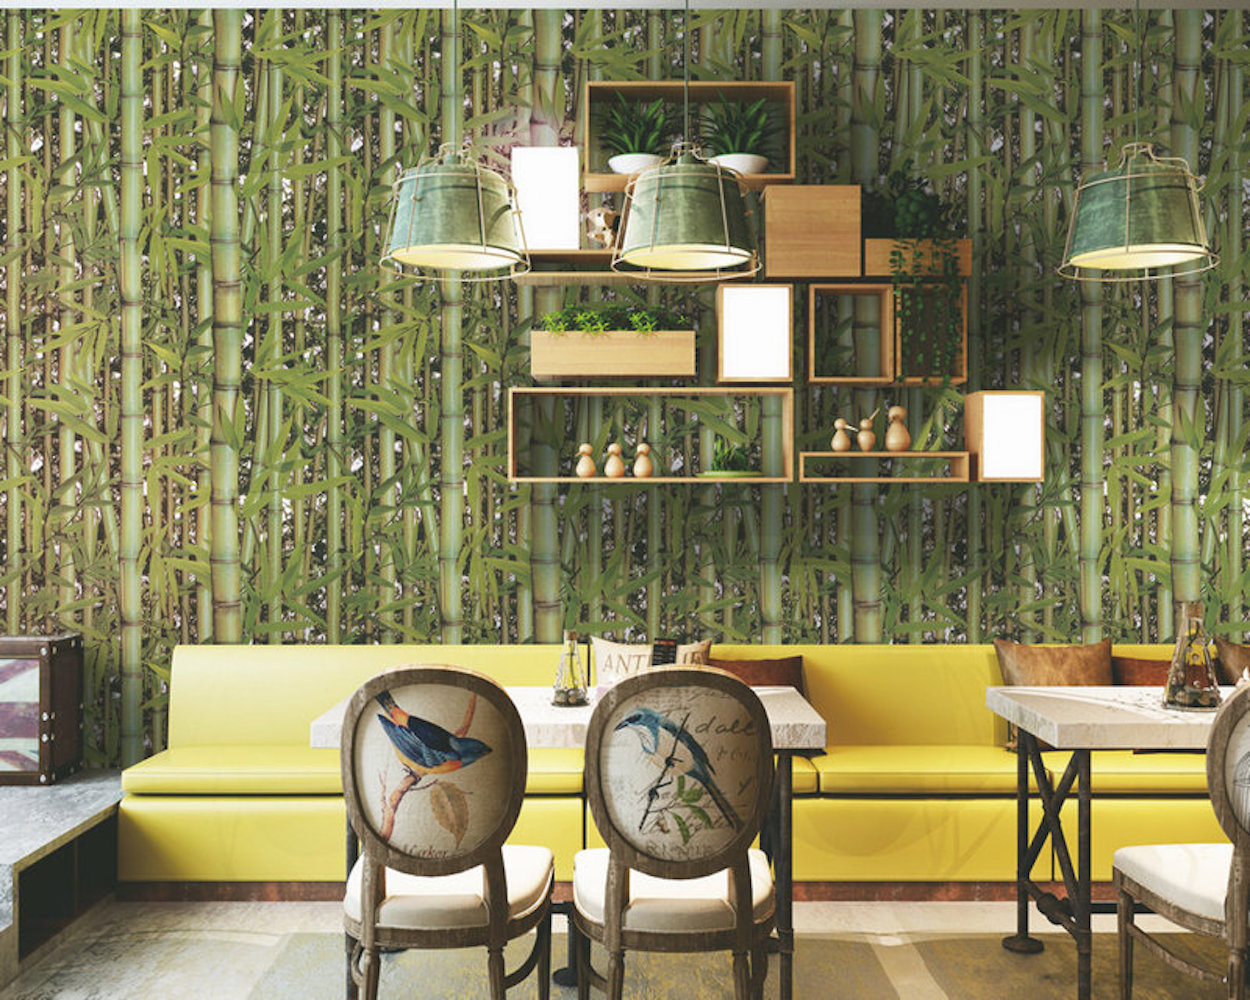 Wallpapers with Tropical Motifs. Bamboo Forest - The Savvy Decorator